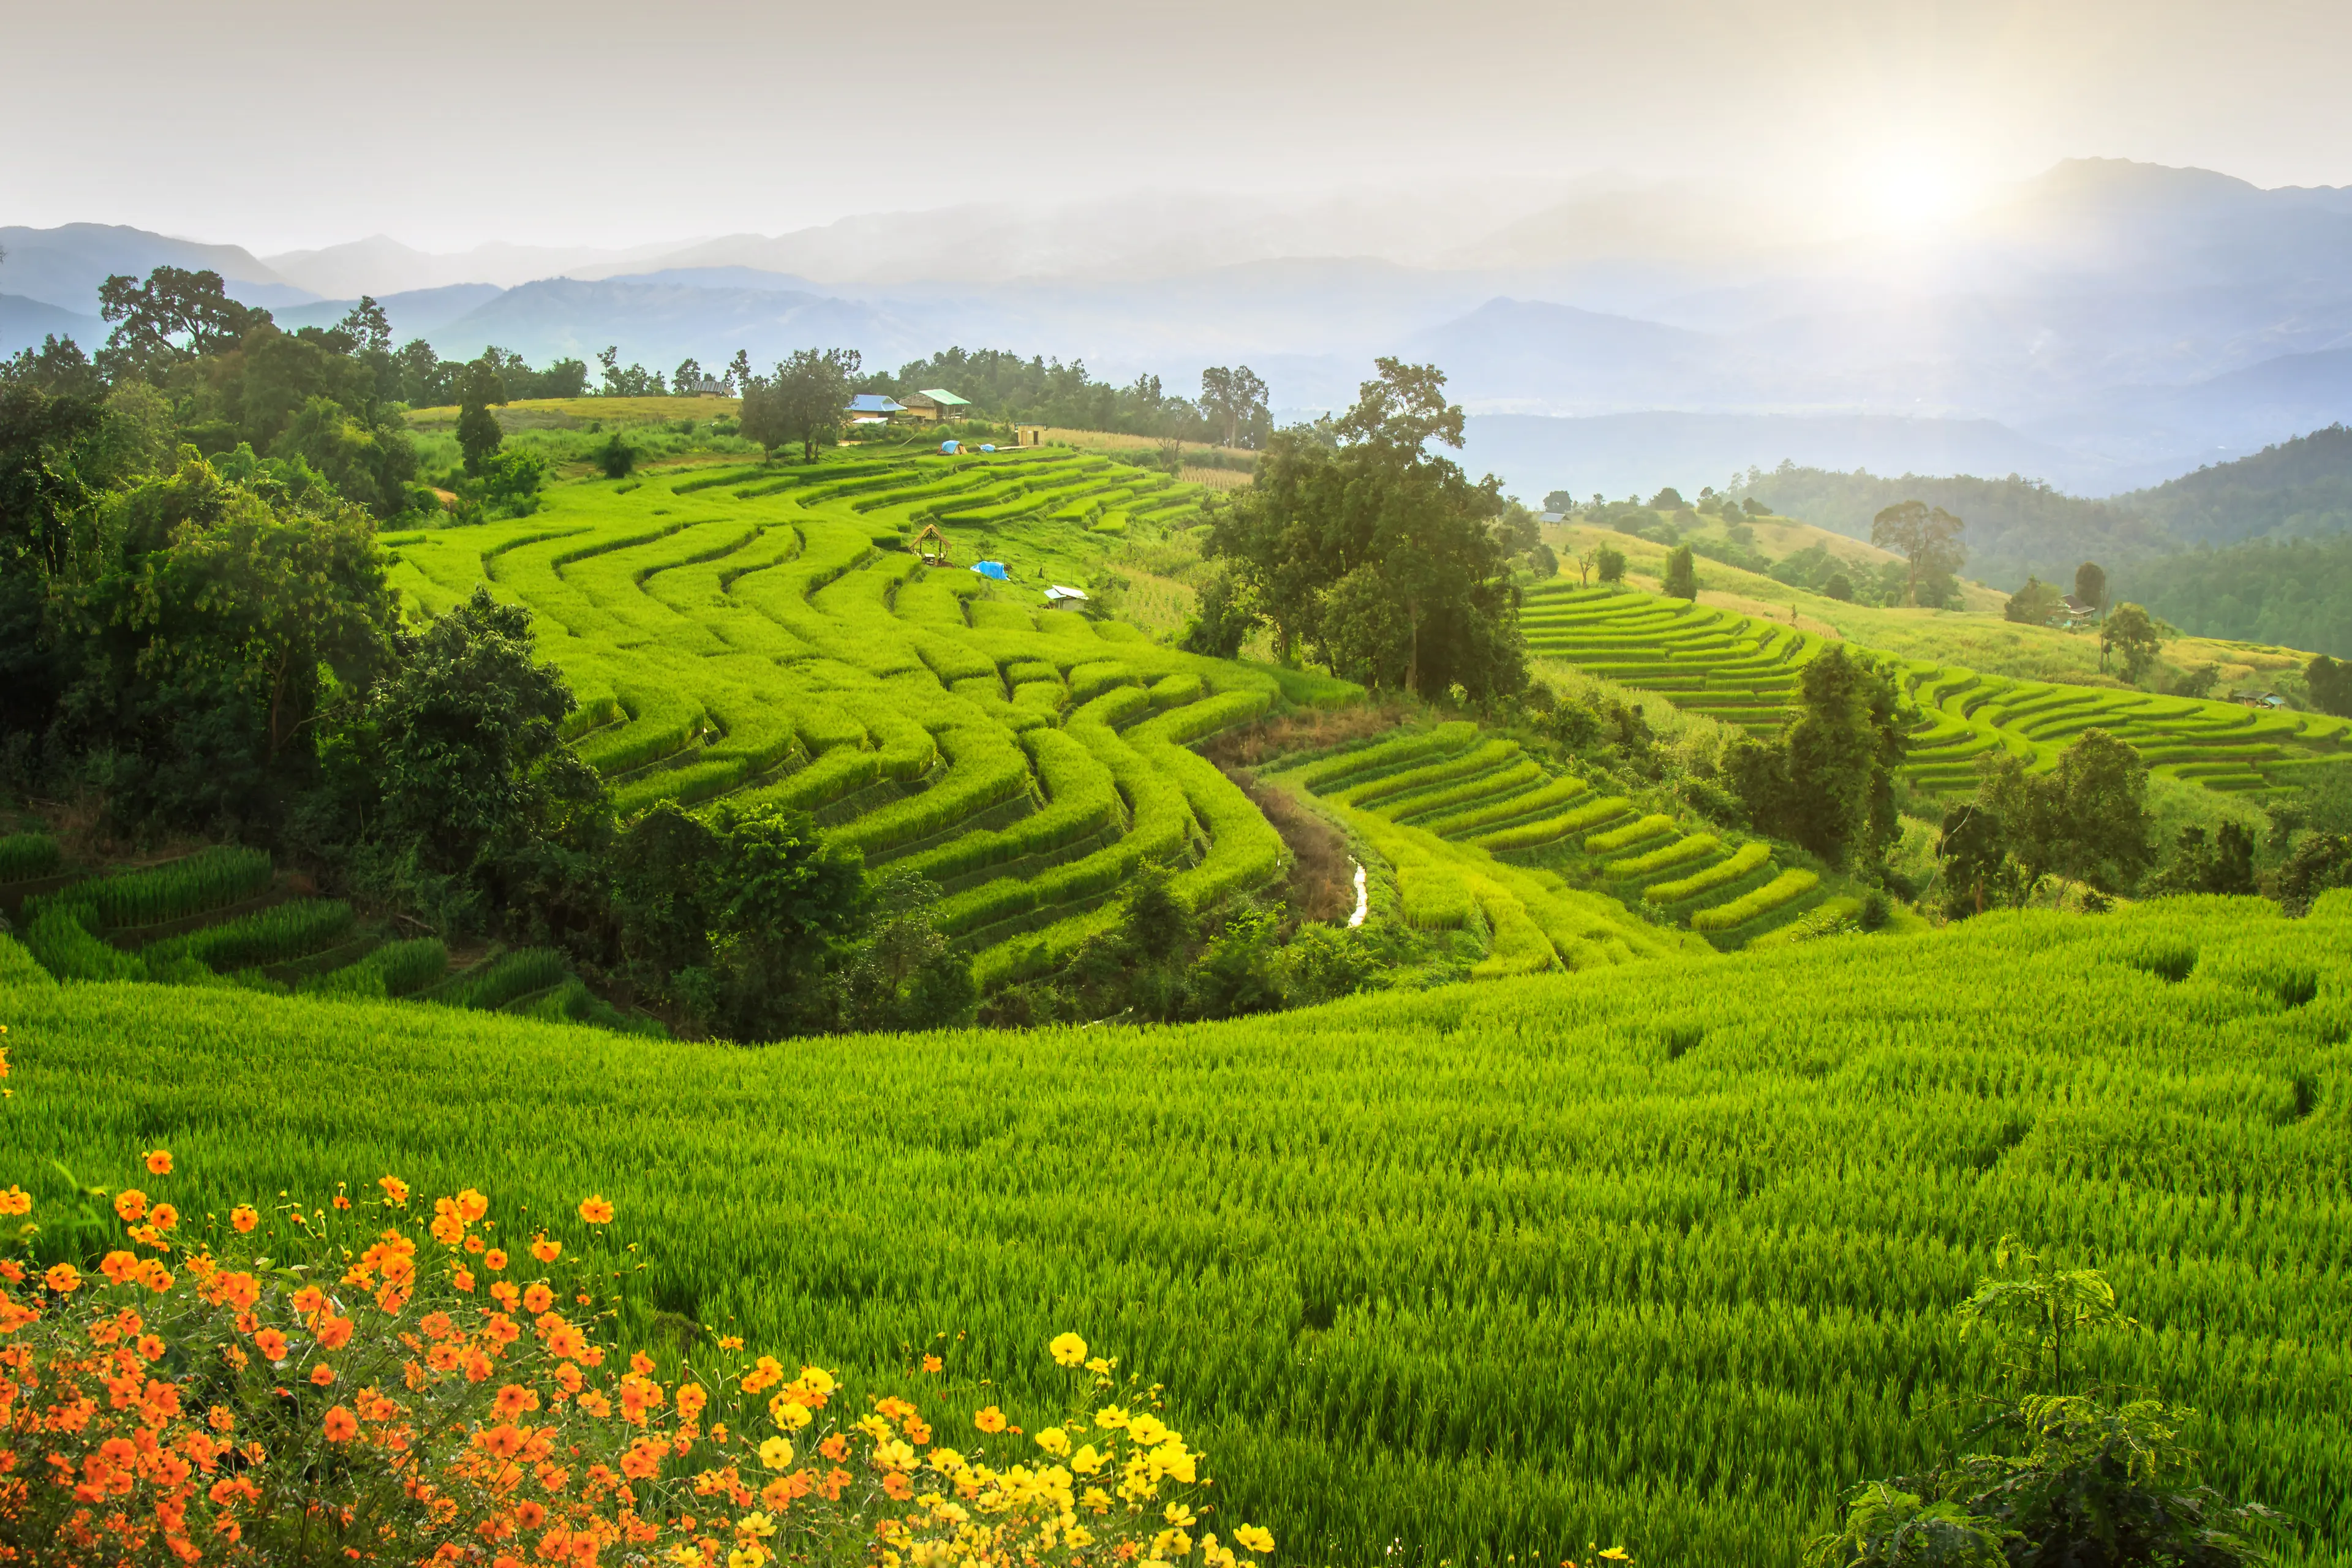 3-Day Ultimate Travel Itinerary for Chiang Mai, Thailand